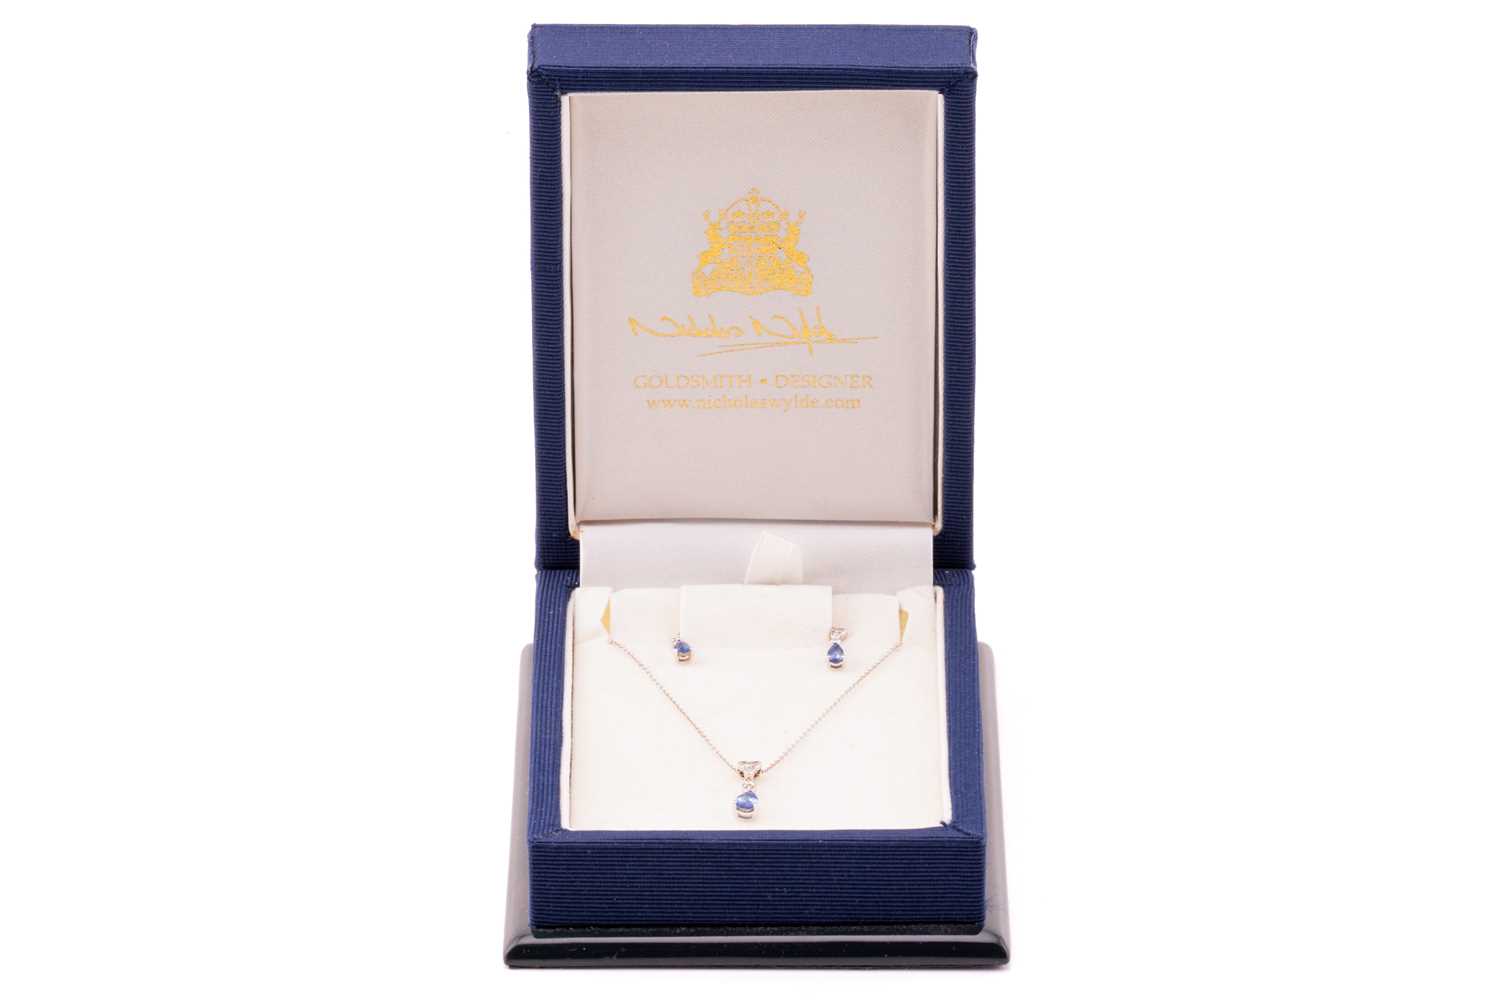 A sapphire and diamond necklace and earrings en-suite; the necklace comprises a pear-shaped sapphire